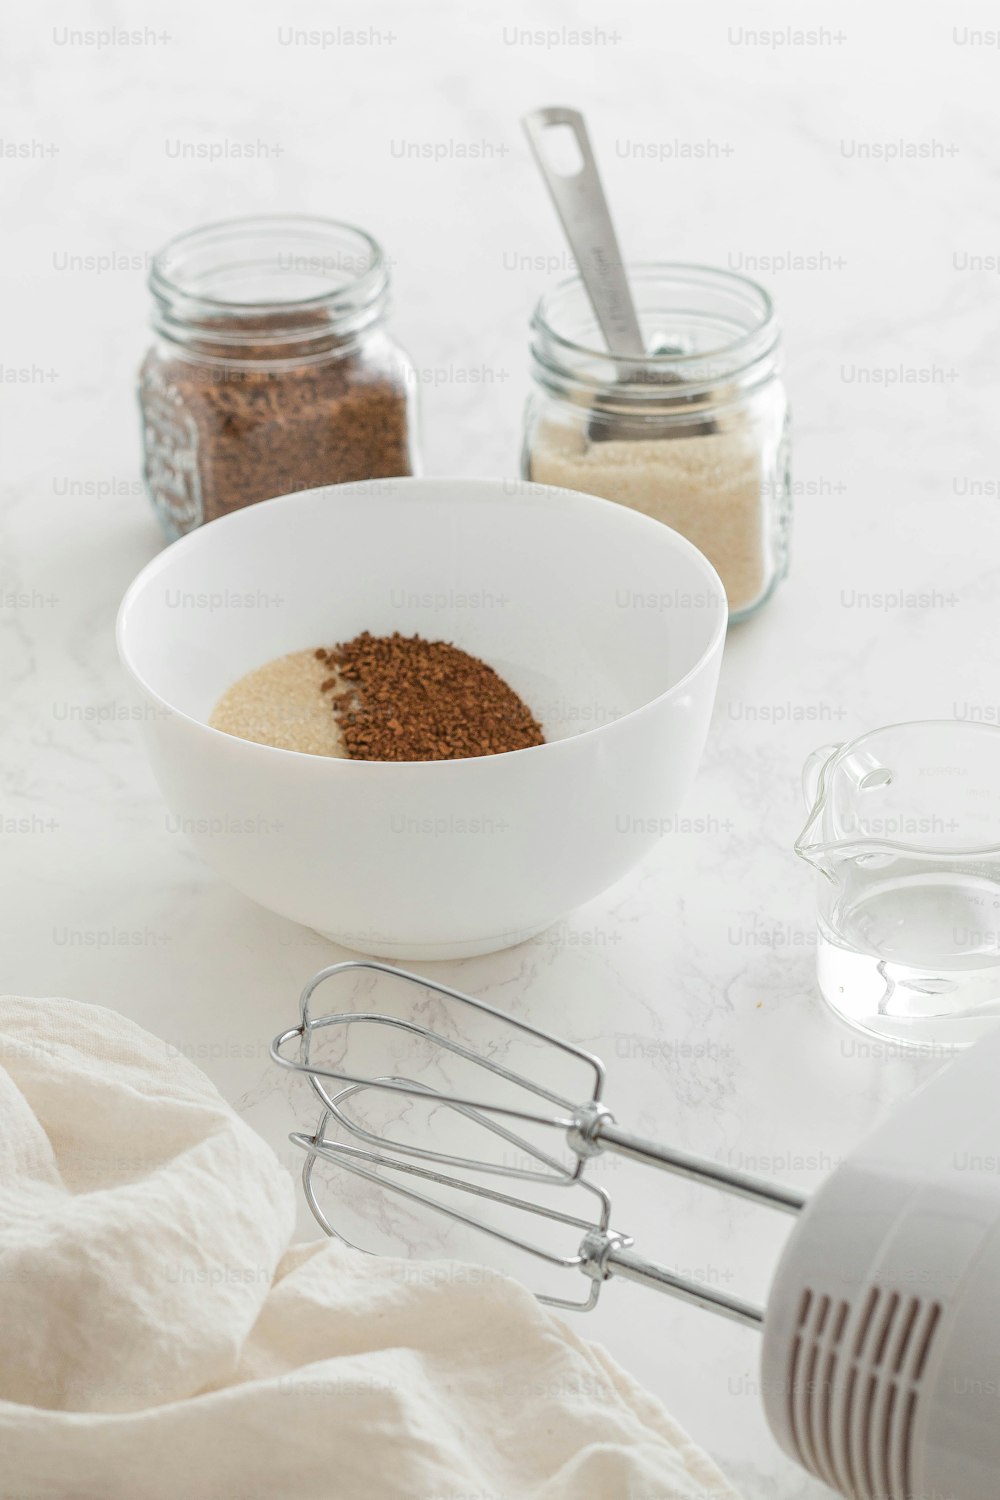 a white bowl filled with spices next to a whisk and a whis